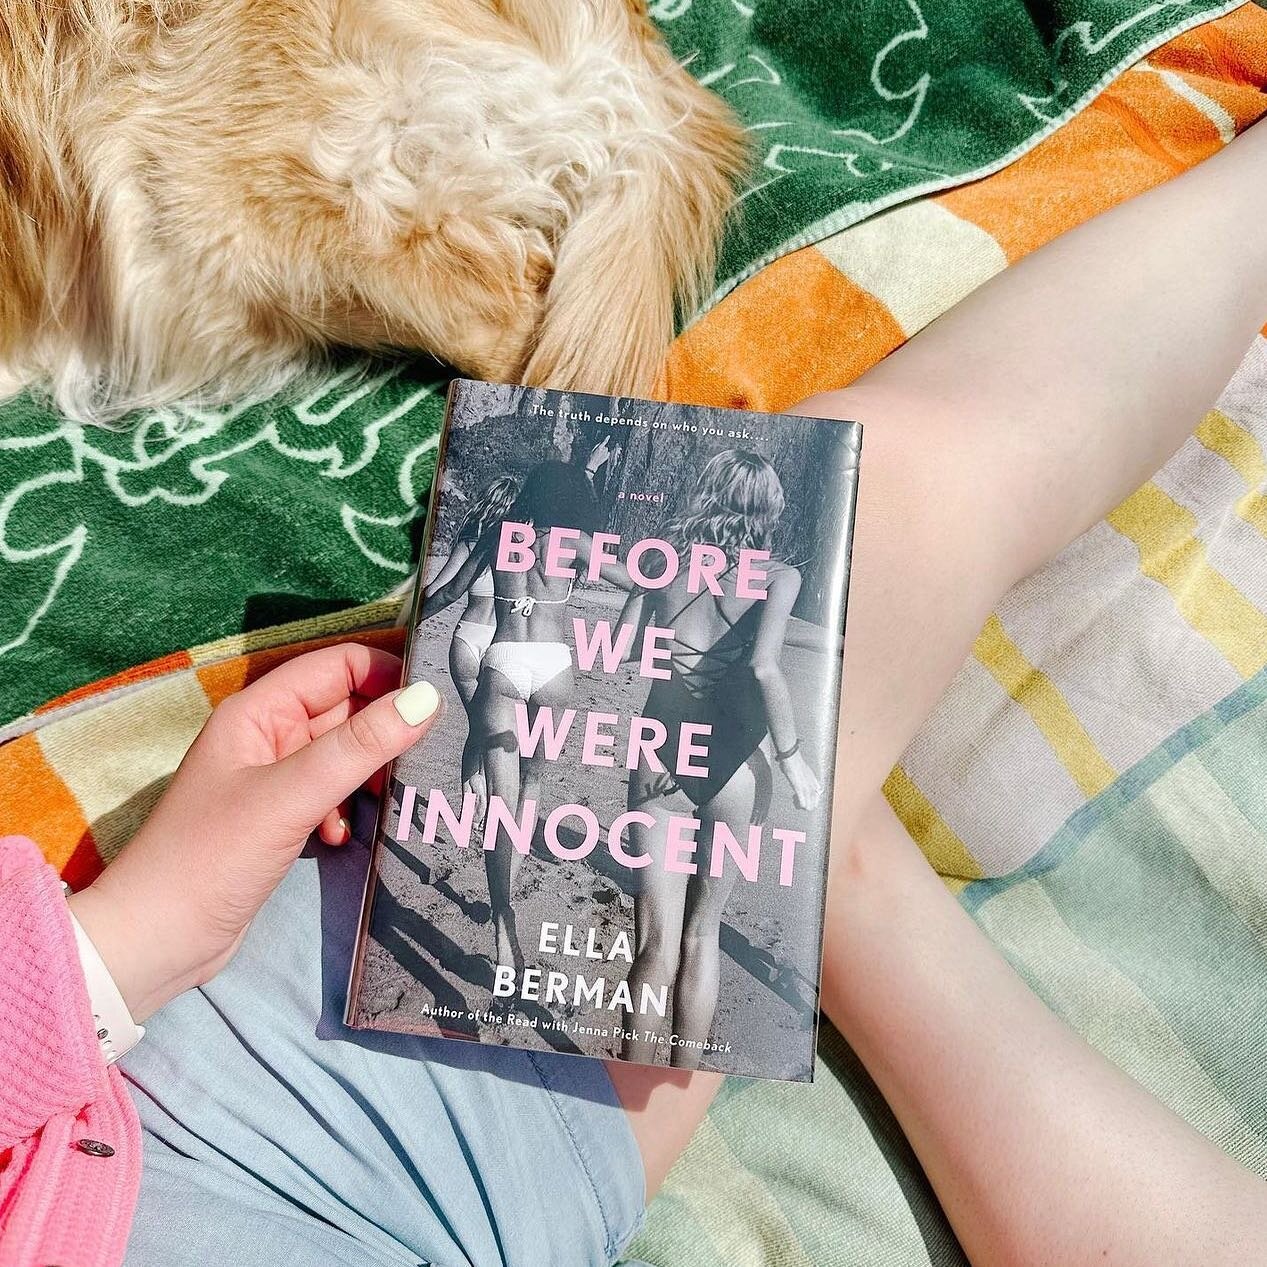 We&rsquo;re so excited to discuss Before We Were Innocent by @ellamberman! This book fits right in the venn diagram of Becca and Olivia&rsquo;s differing book tastes. We discuss how we felt about the friendship between the characters in the past vs p